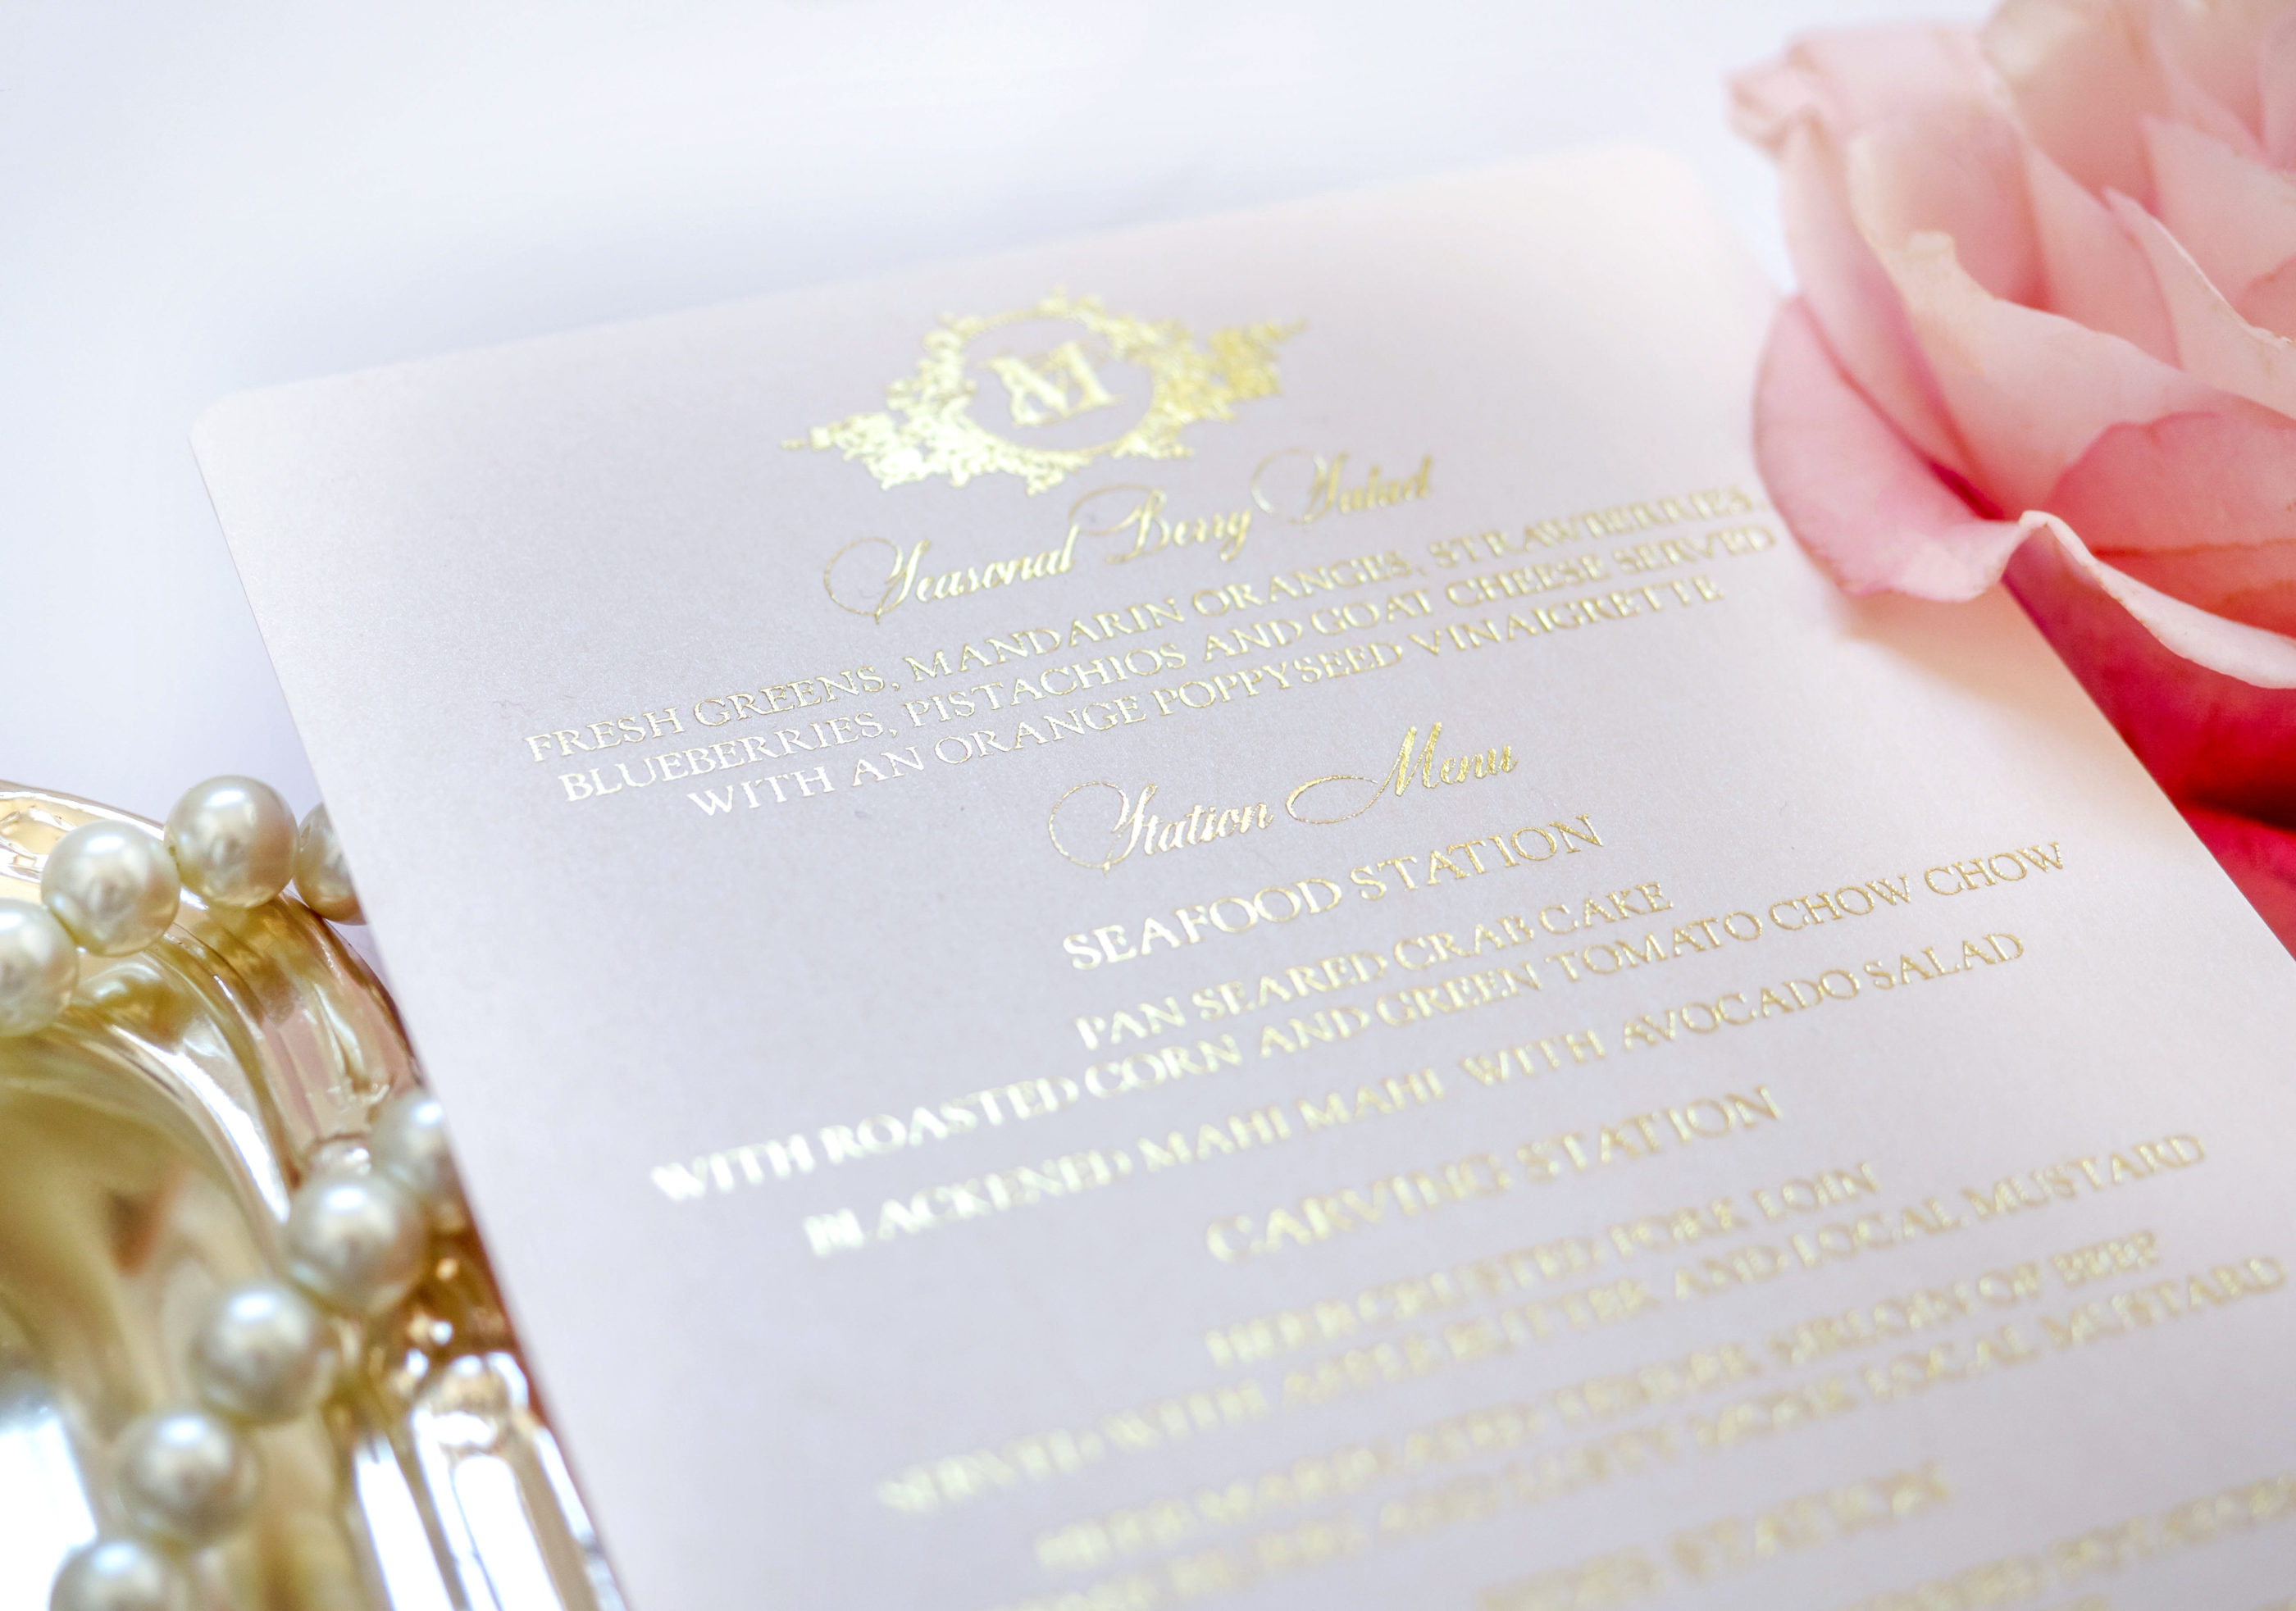 invitation photographed up close showing gold foil embossing